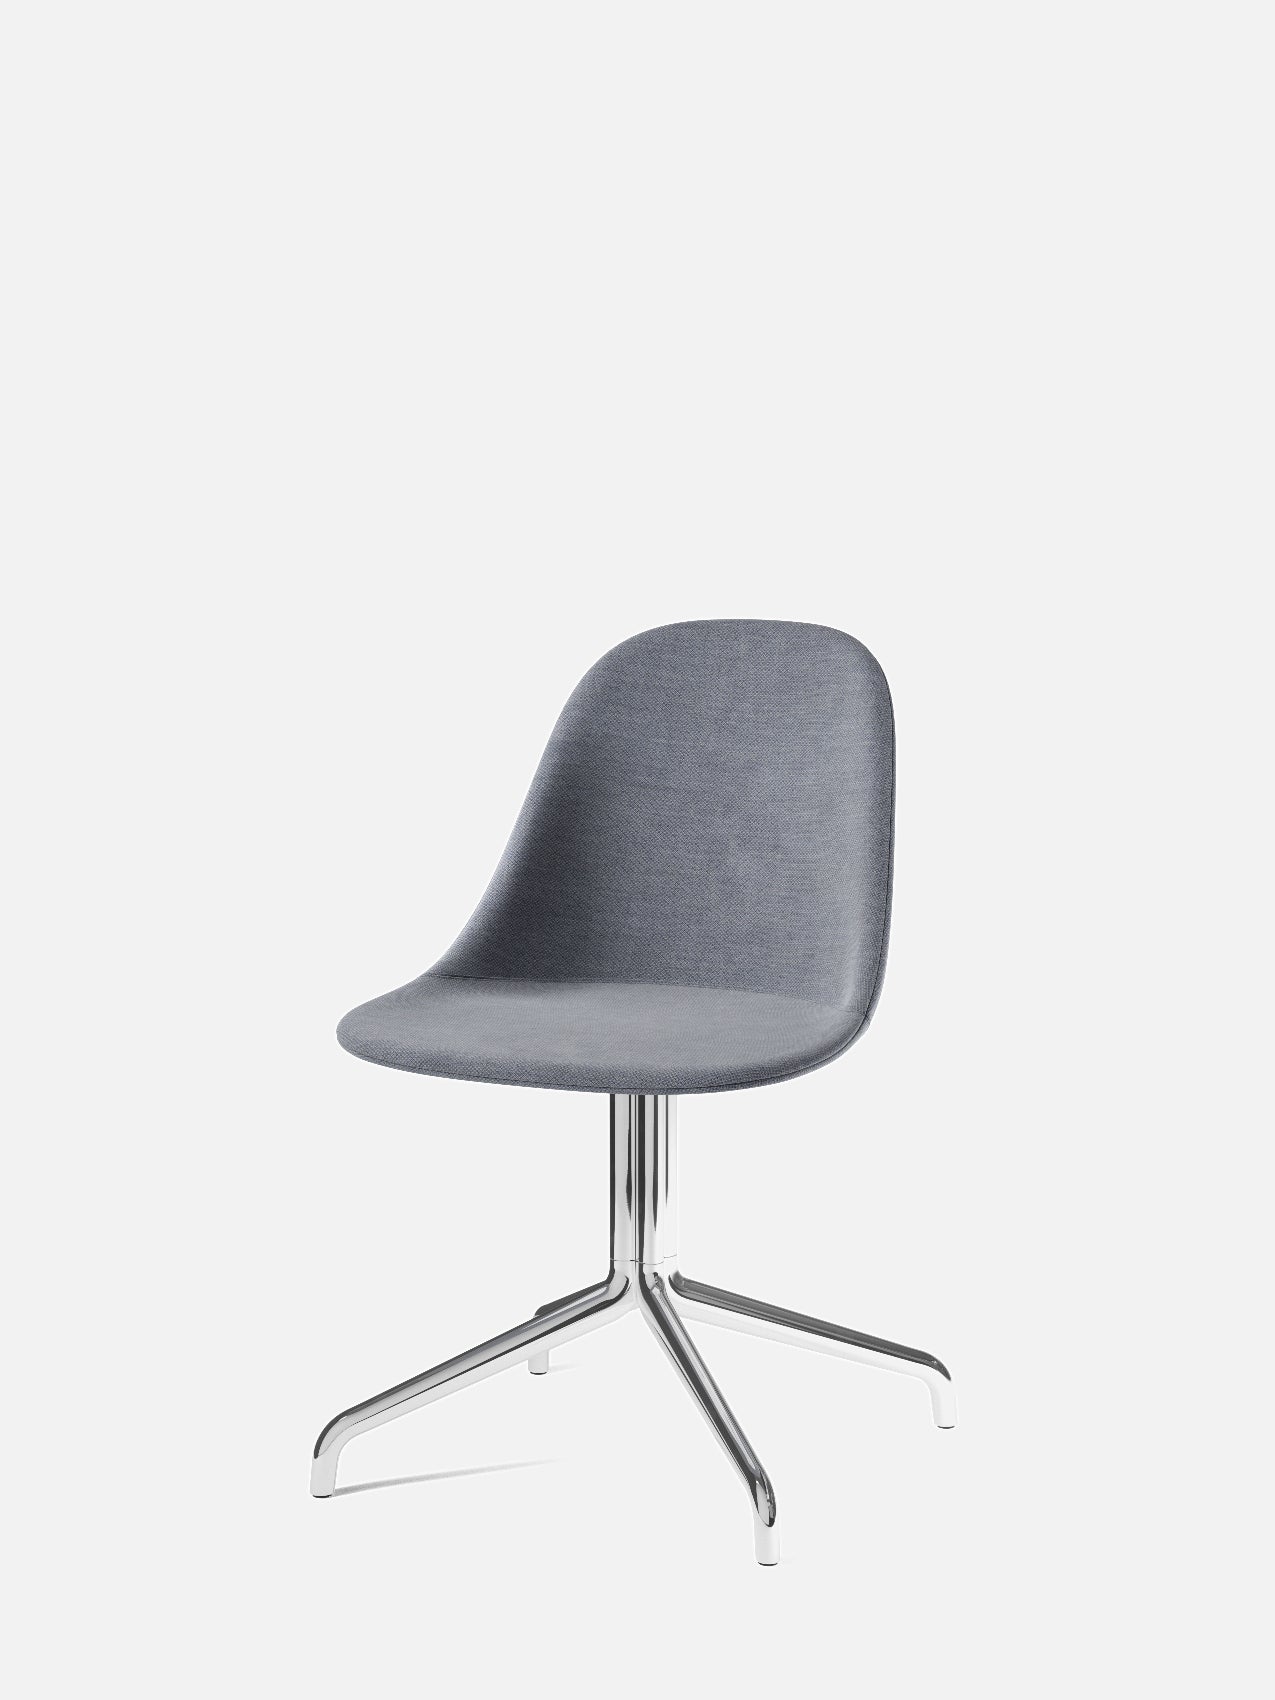 Harbour Side Chair, Upholstered-Chair-Norm Architects-menu-minimalist-modern-danish-design-home-decor